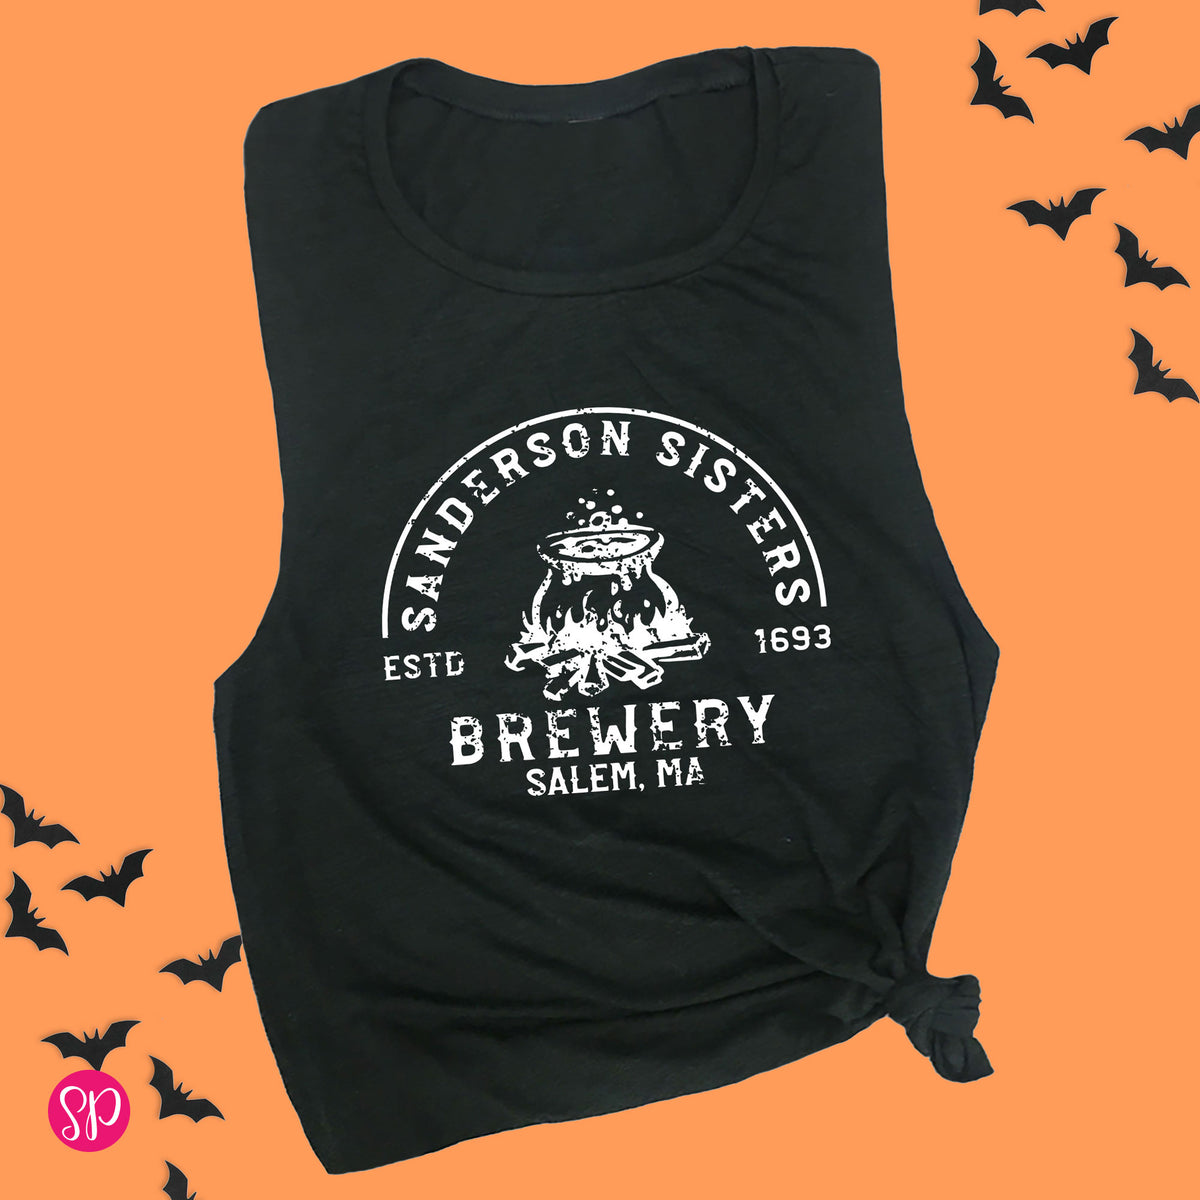 Sanderson Brewery Salem MA 1693 Hocus Pocus Witch Brew Movie Graphic Workout Fitness Tank Top